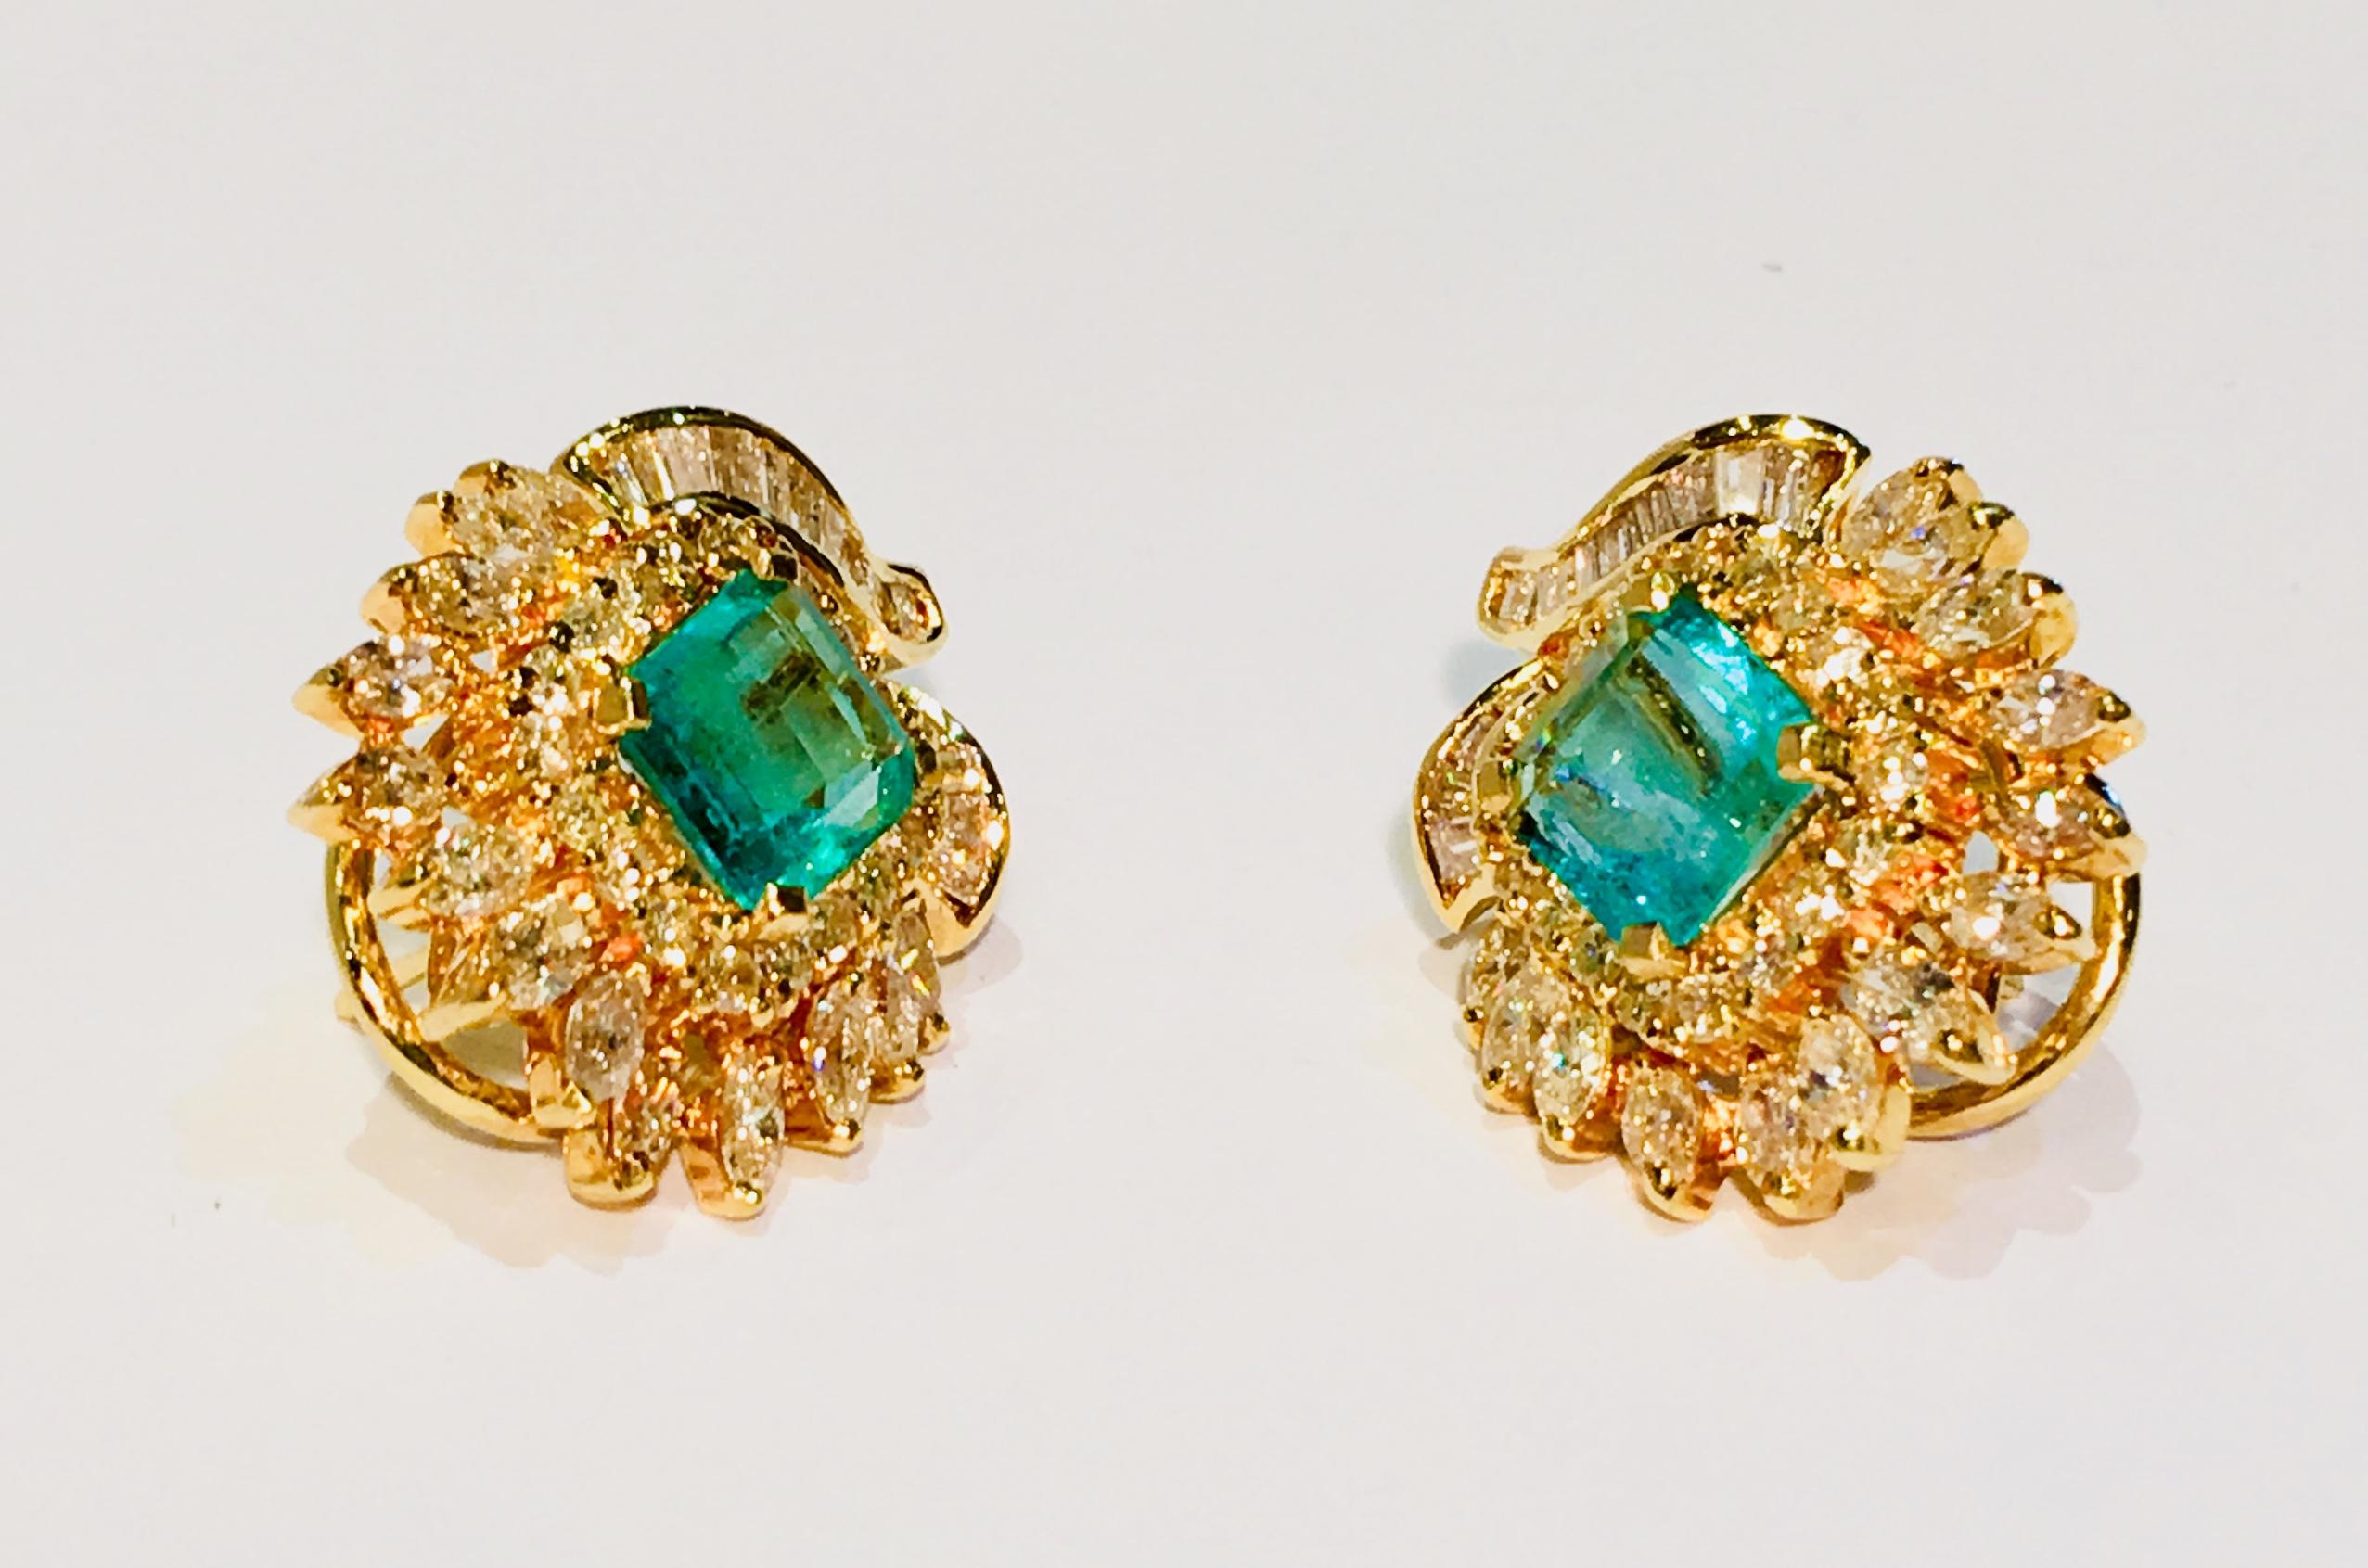 Beautiful pair of custom made estate floral motif earrings feature large, prong set, emerald cut emeralds surrounded by prong set, round brilliant and marquise cut diamonds, and channel set, baguette cut diamonds in 18 karat yellow gold with posts